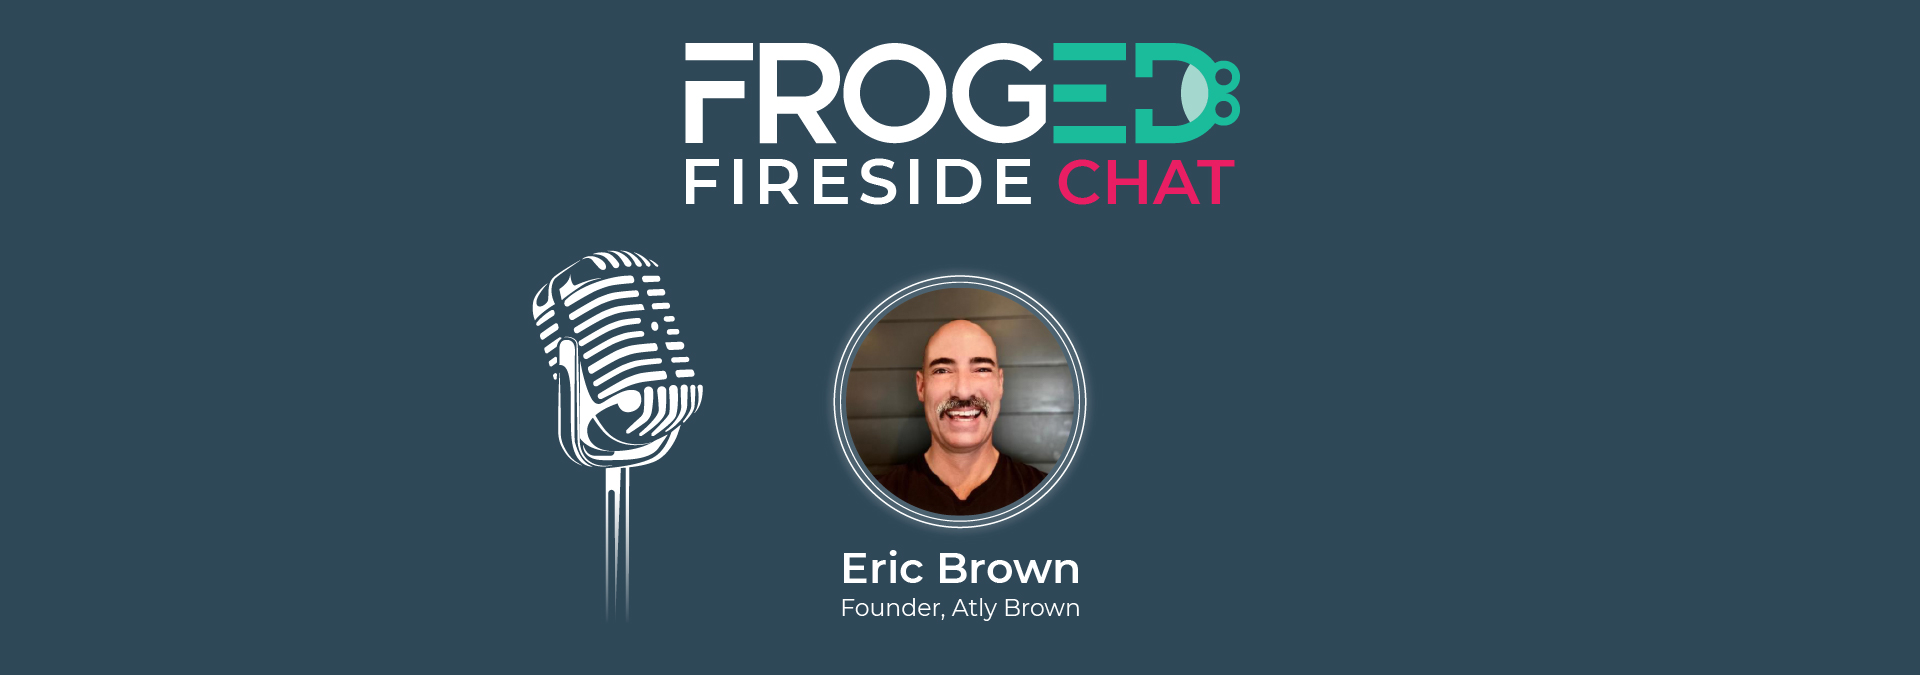 fireside-chat-eric-brown-marketing-valuation